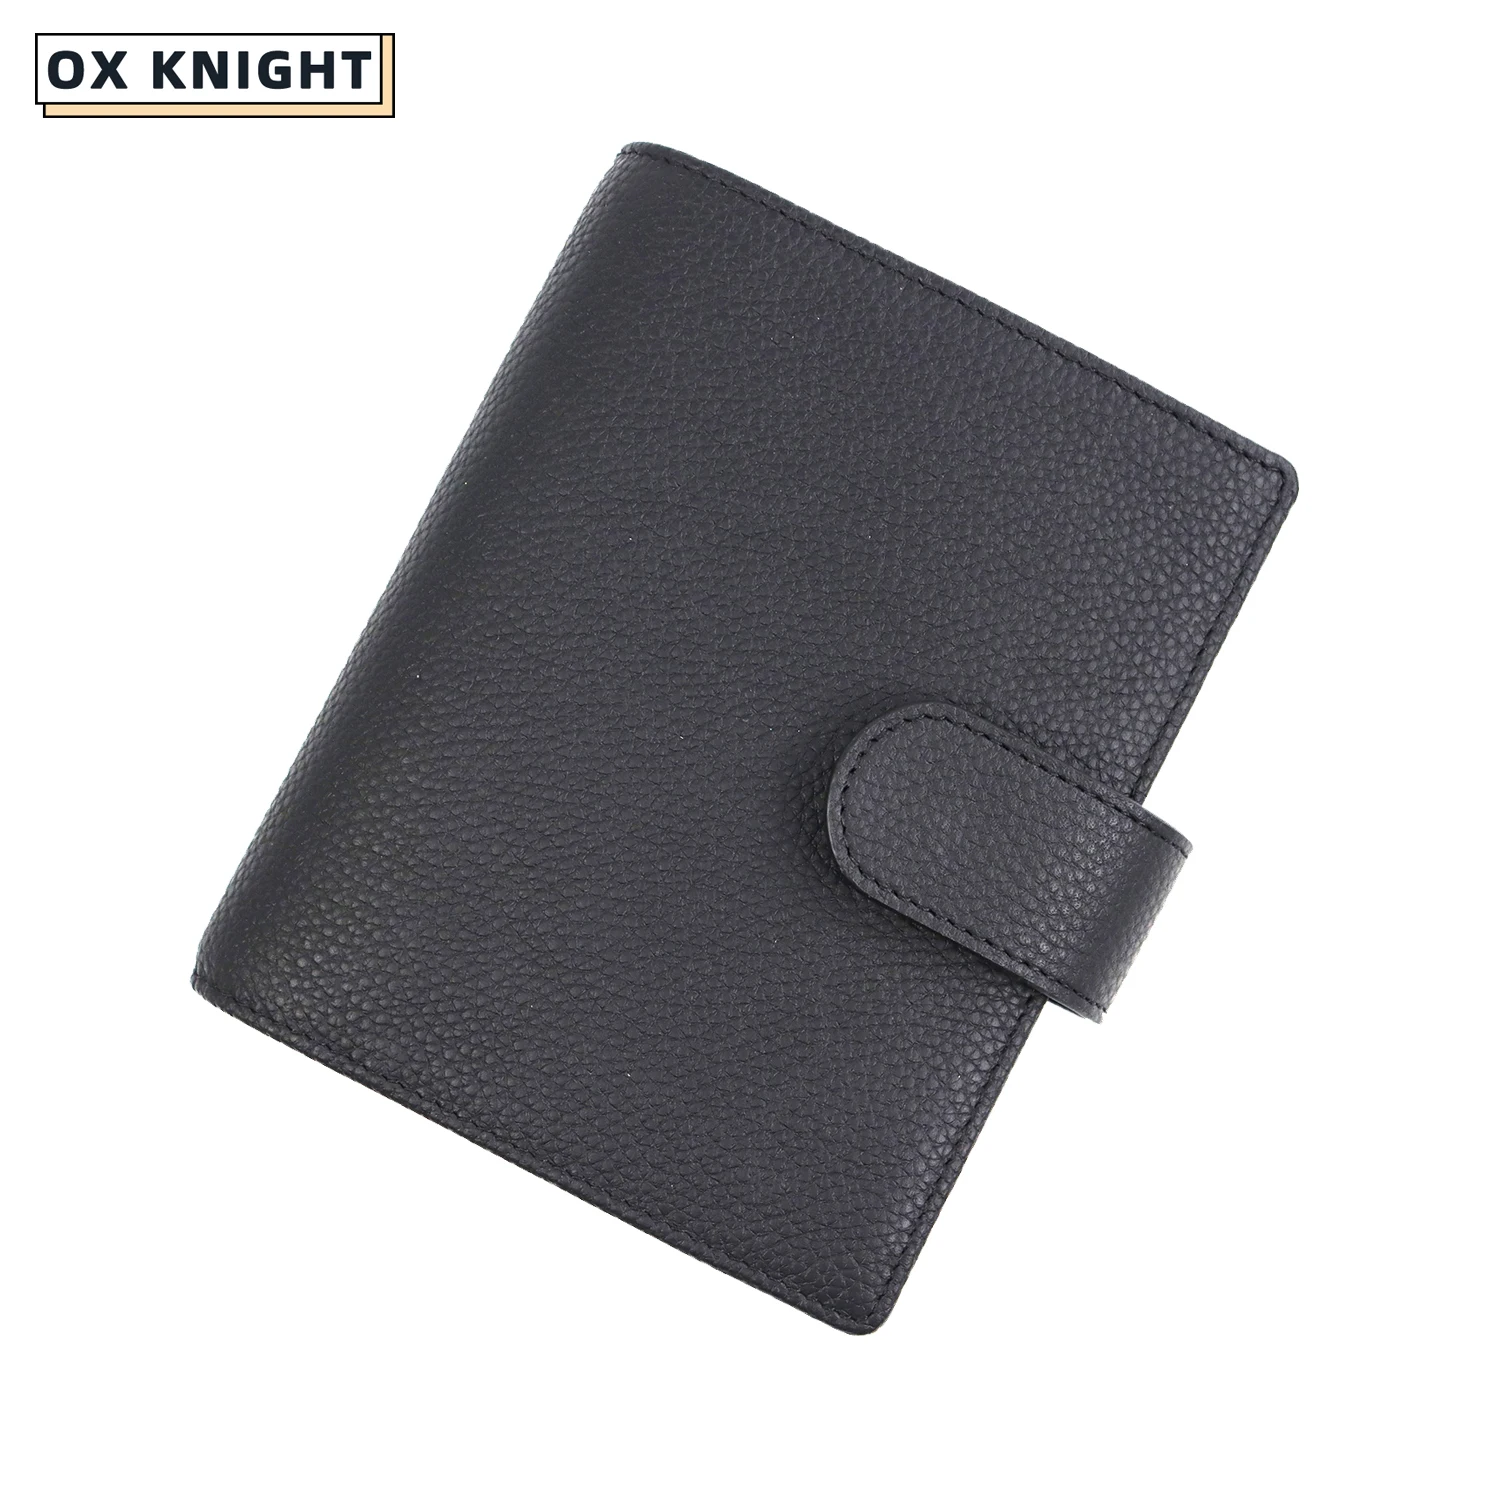 OX KNIGHT Mini A7 Notebook With 19-25 MM Silver Rings Pebbled Grain Leather Week Planner Organizer Journey Diary Sketchbook